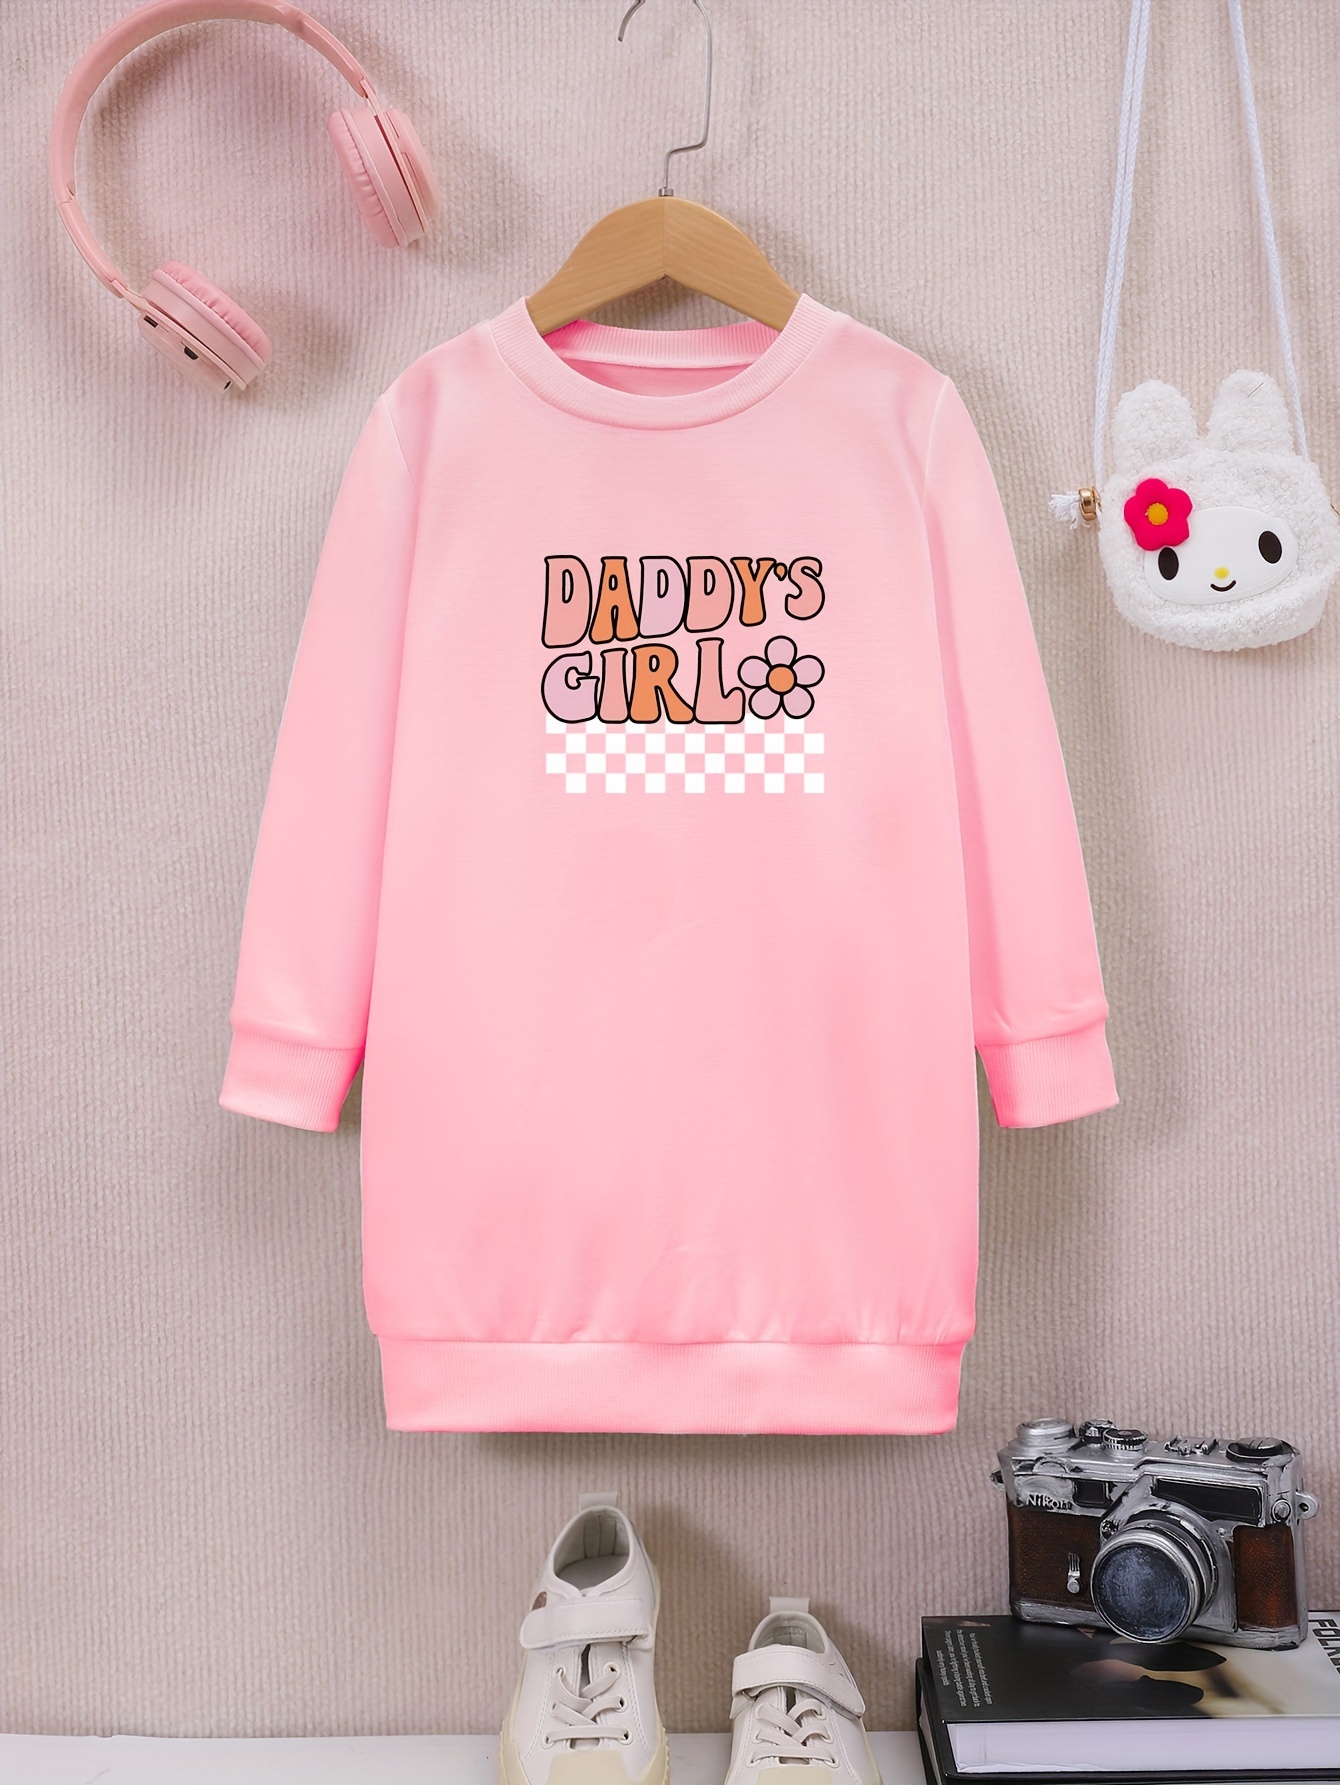 daddys girl print little girls casual long sleeve dress pullover comfy sweatshirt dresses for a fashionable look